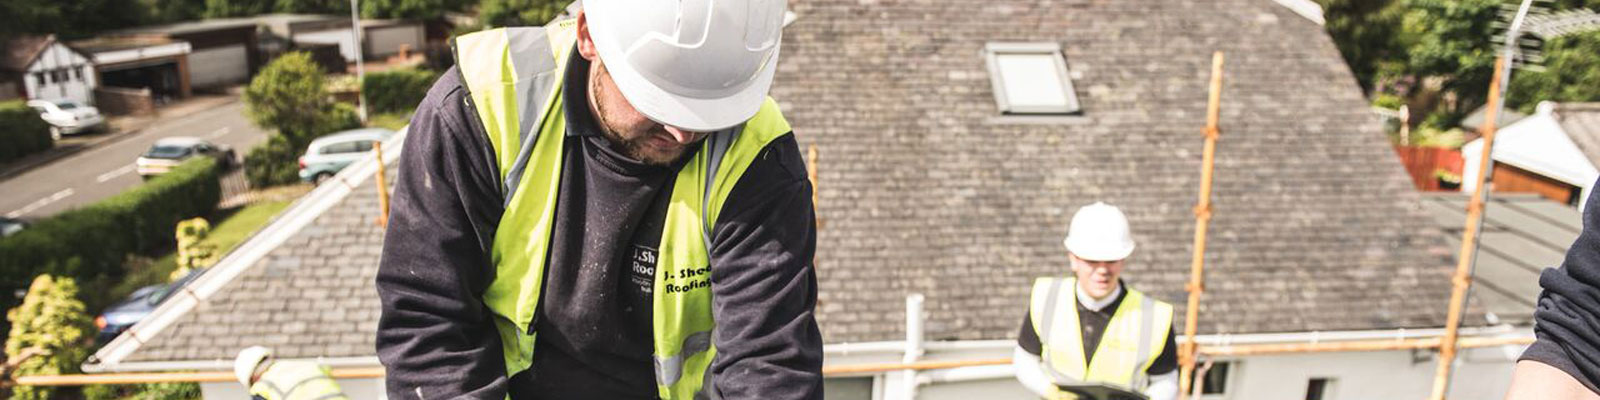 Roofing Services across Anniesland